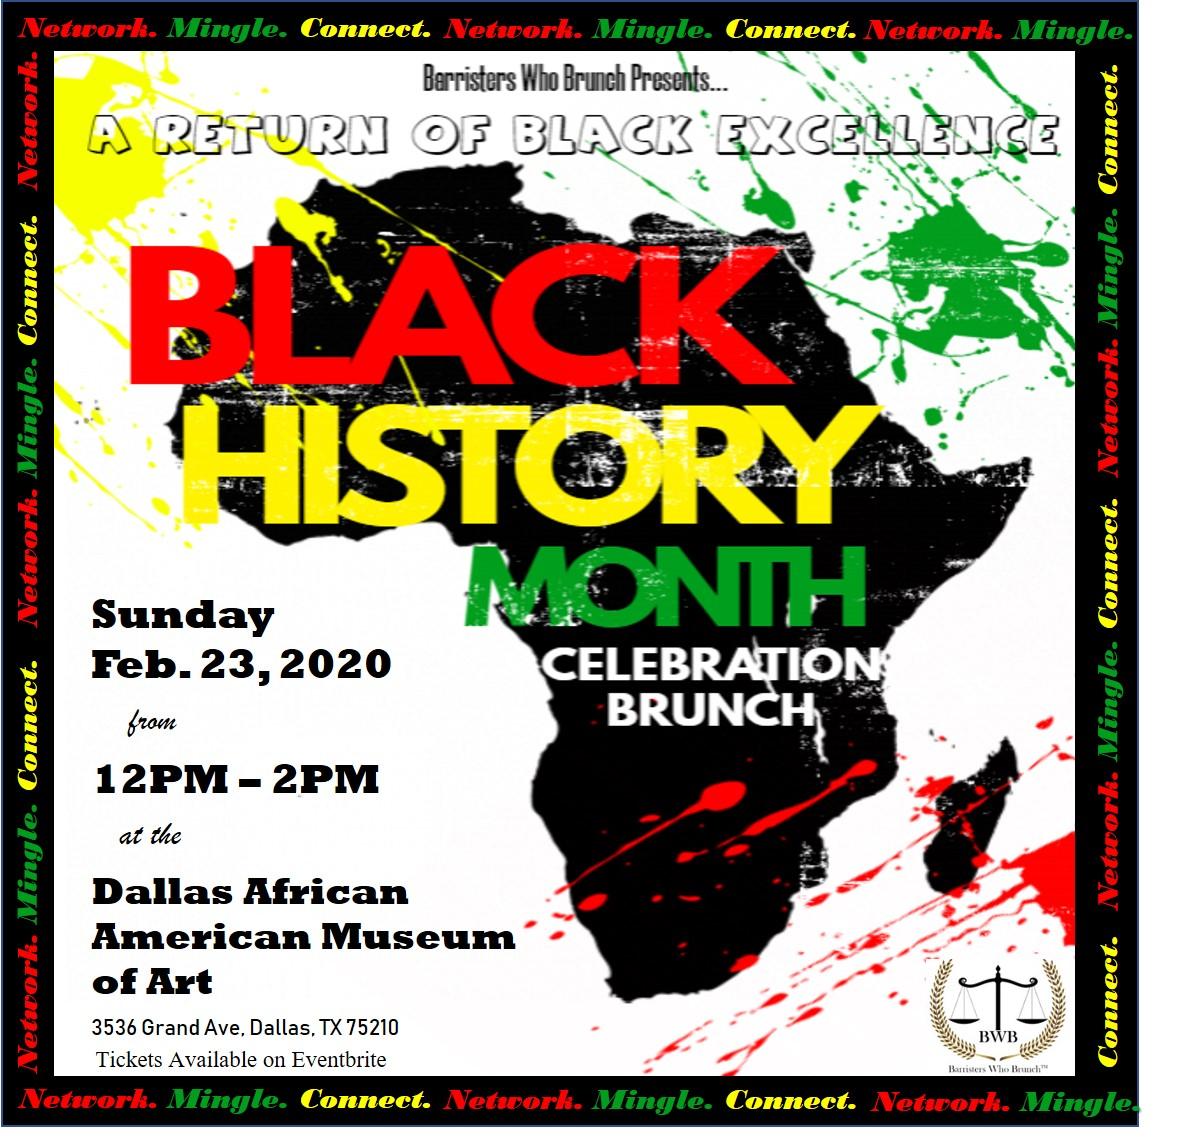 Barristers Who Brunch Presents: A Return of Black Excellence Brunch